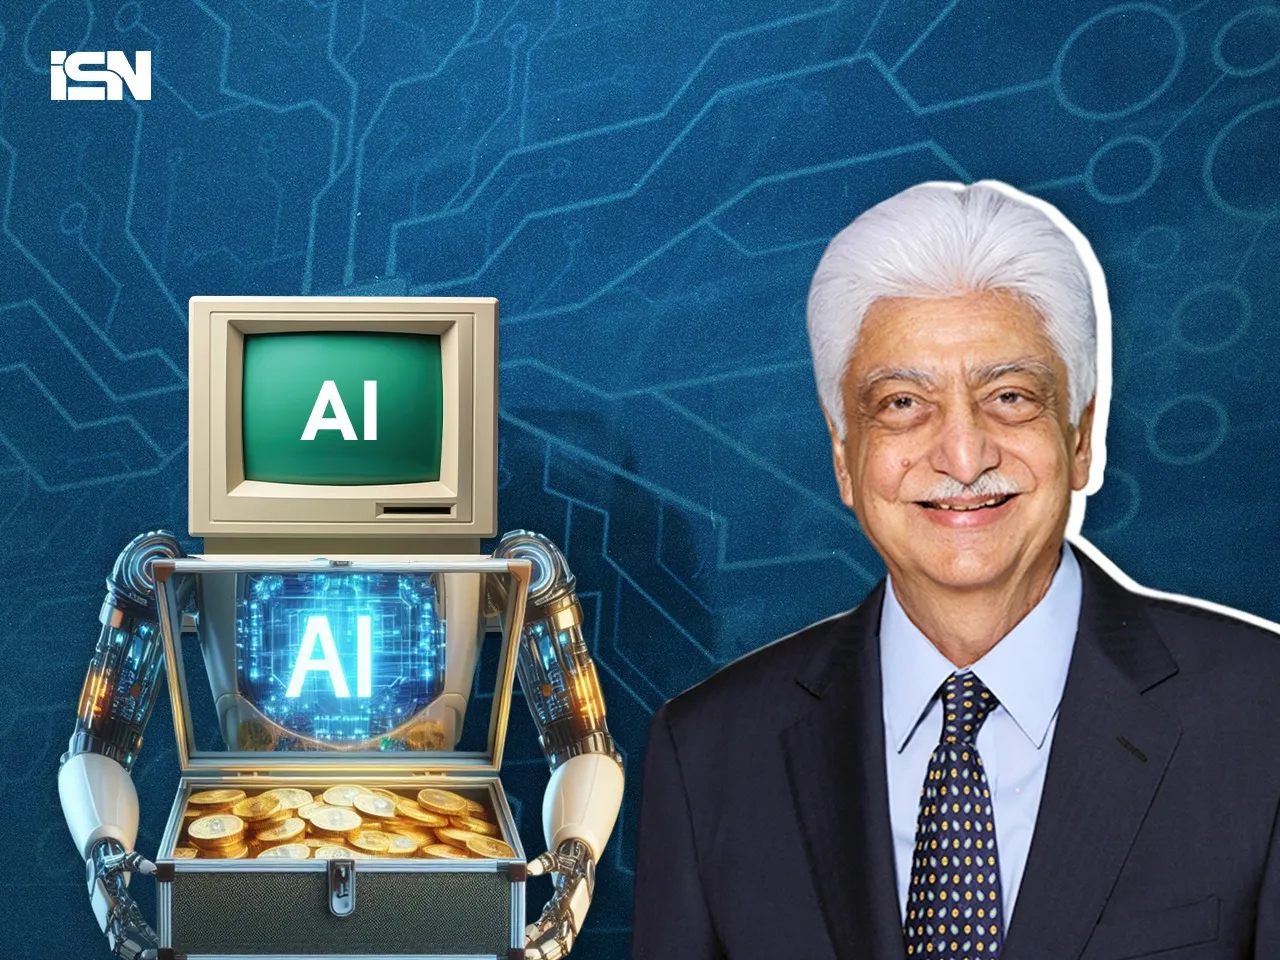 Premji Invest to increase investments in AI startups